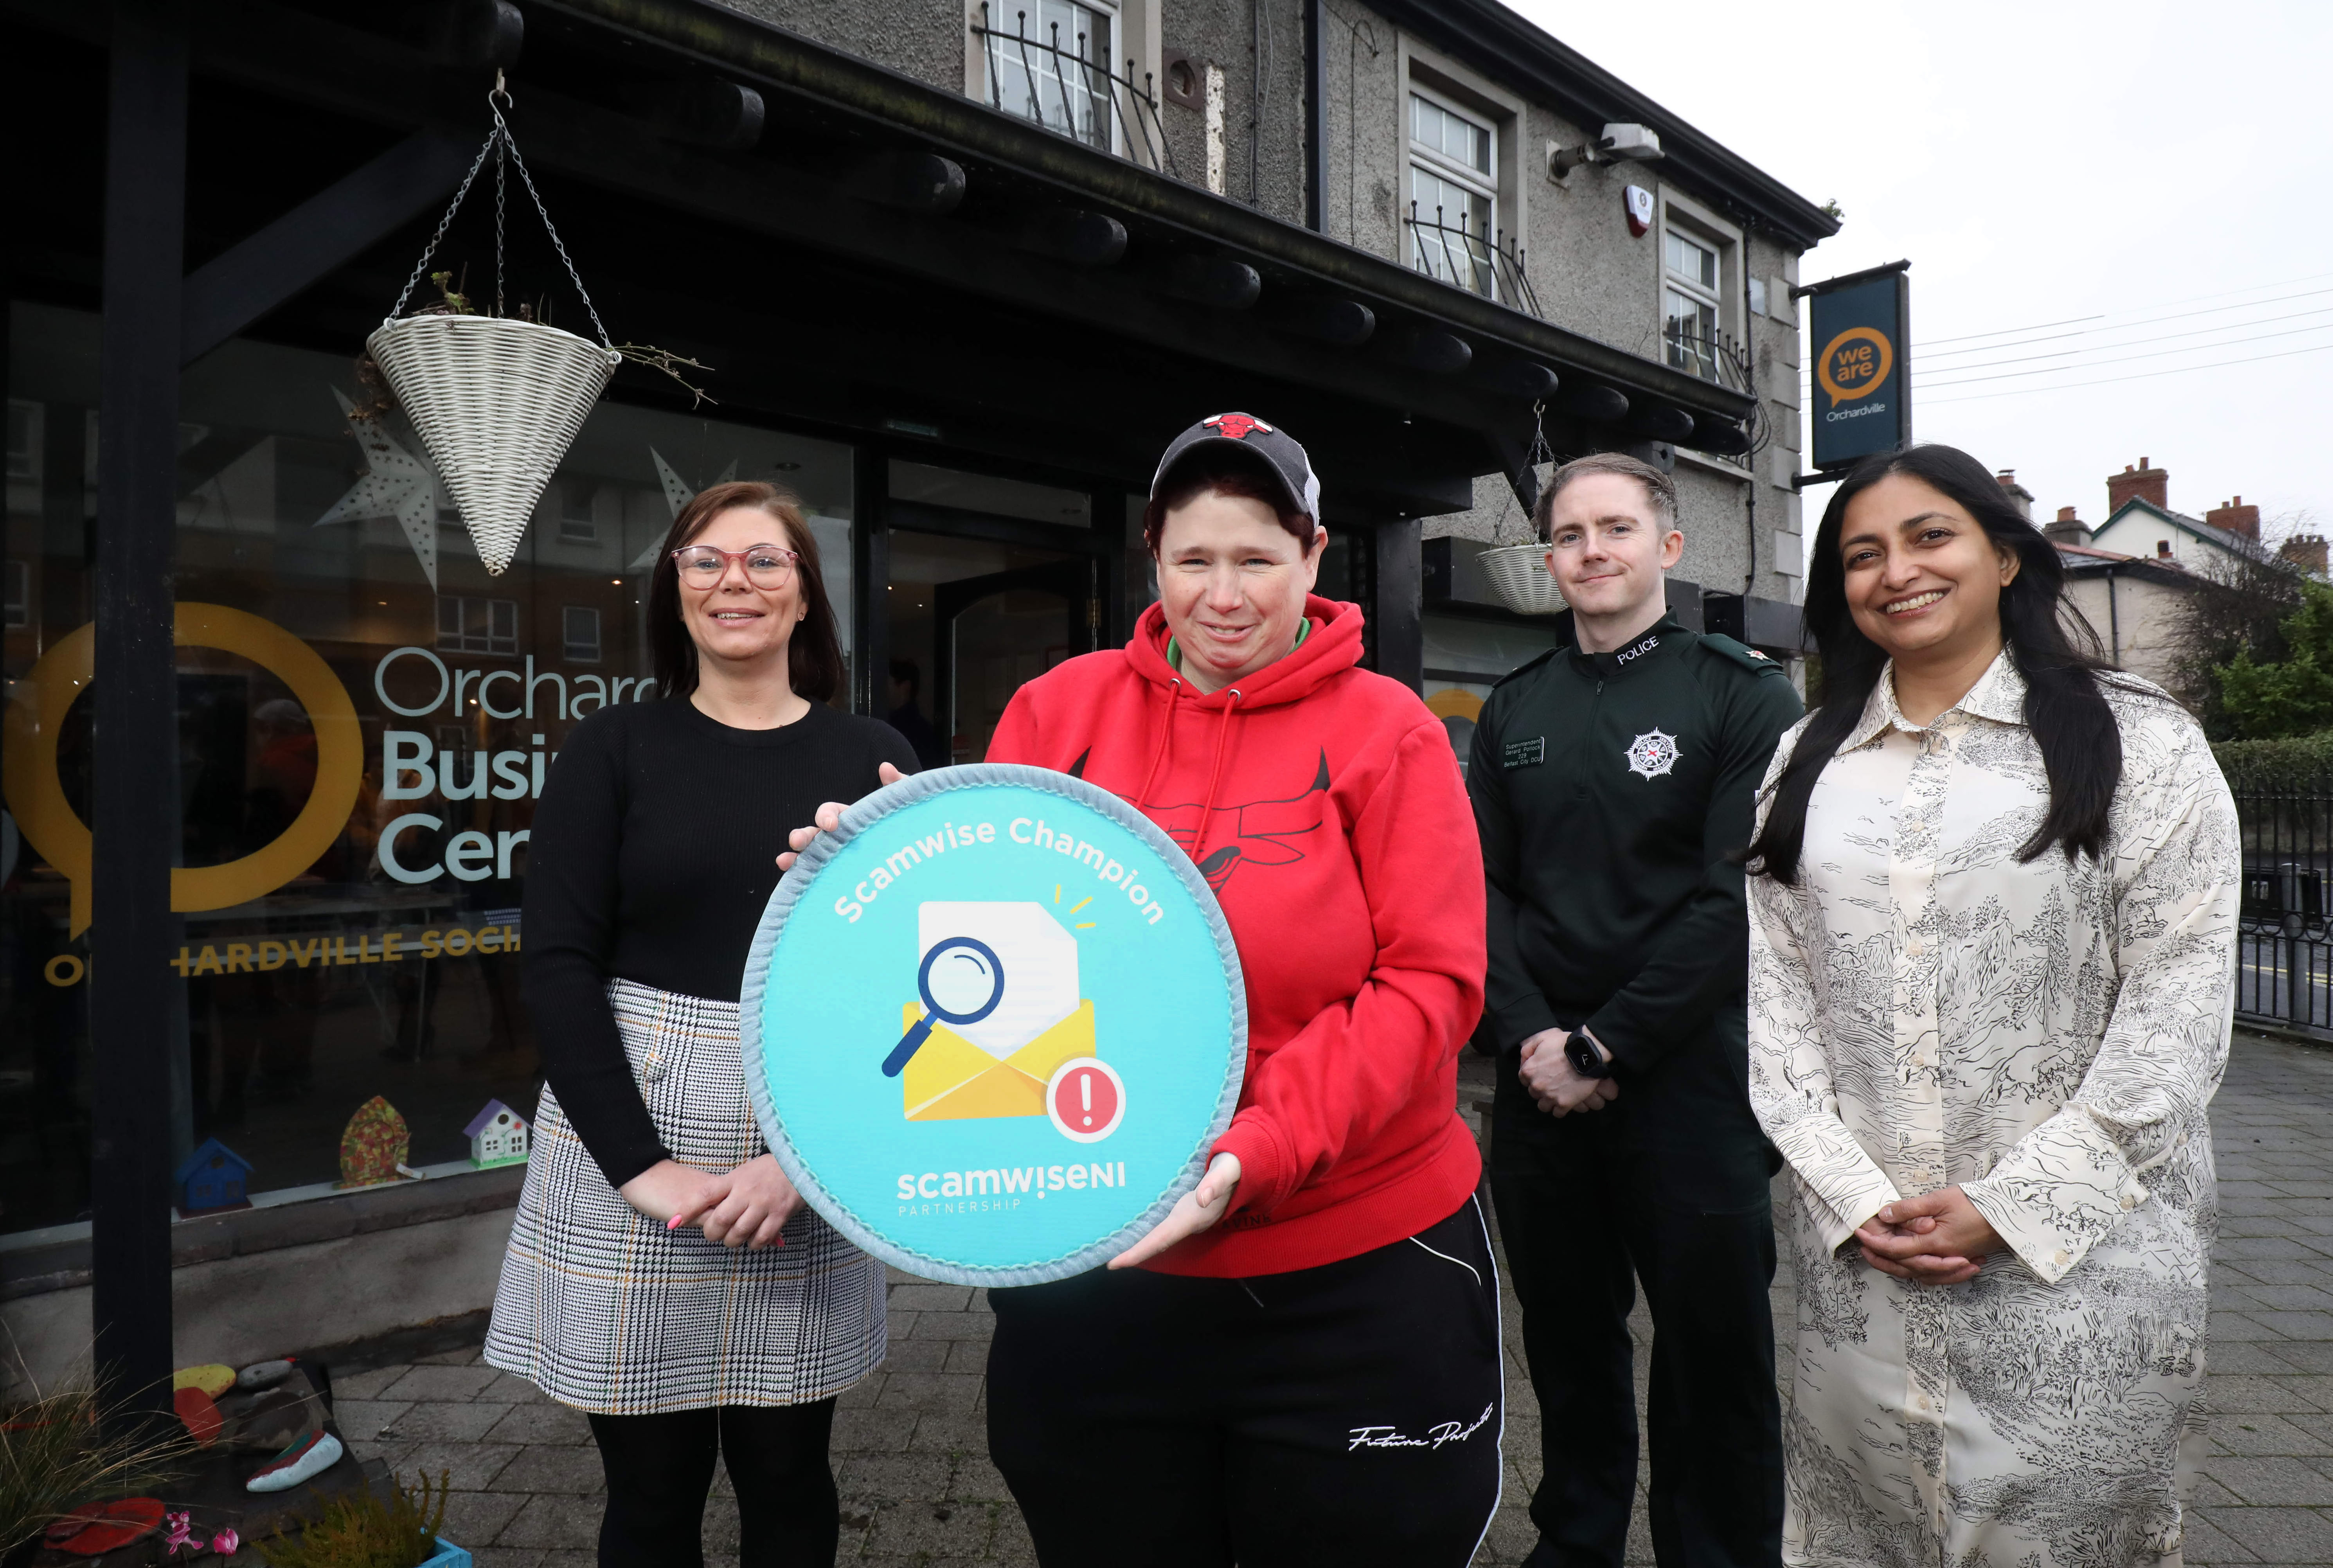 Superintendent Gerard Pollock (PSNI), Noyona Chundur (the Consumer Council), Laura Jamison (Orchardville Society) and Gemma O'Keefe officially launch the Scamwise Champion – Easy Read programme at the Orchadrville Society, Bangor. The programme has been designed to help people with learning difficulties to stay safe from scams.